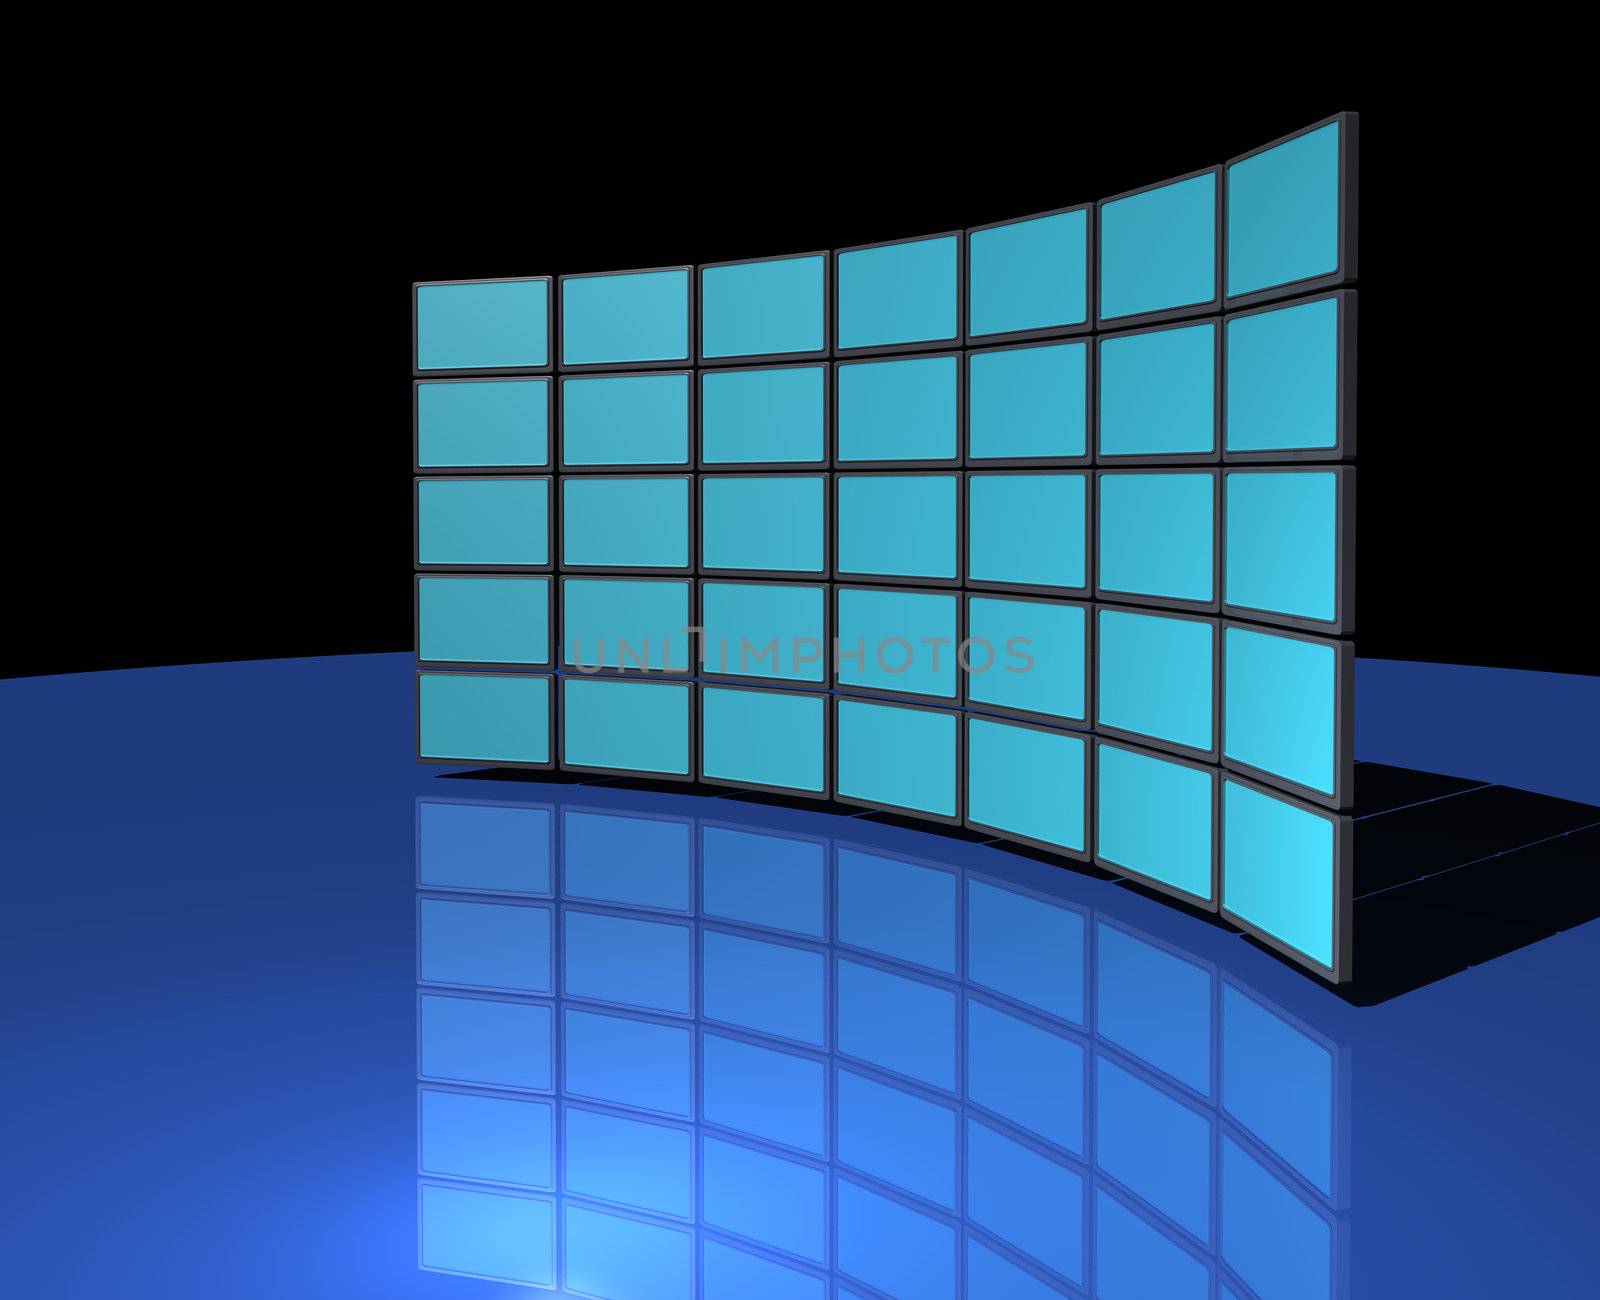 Widescreen monitor wall by anterovium